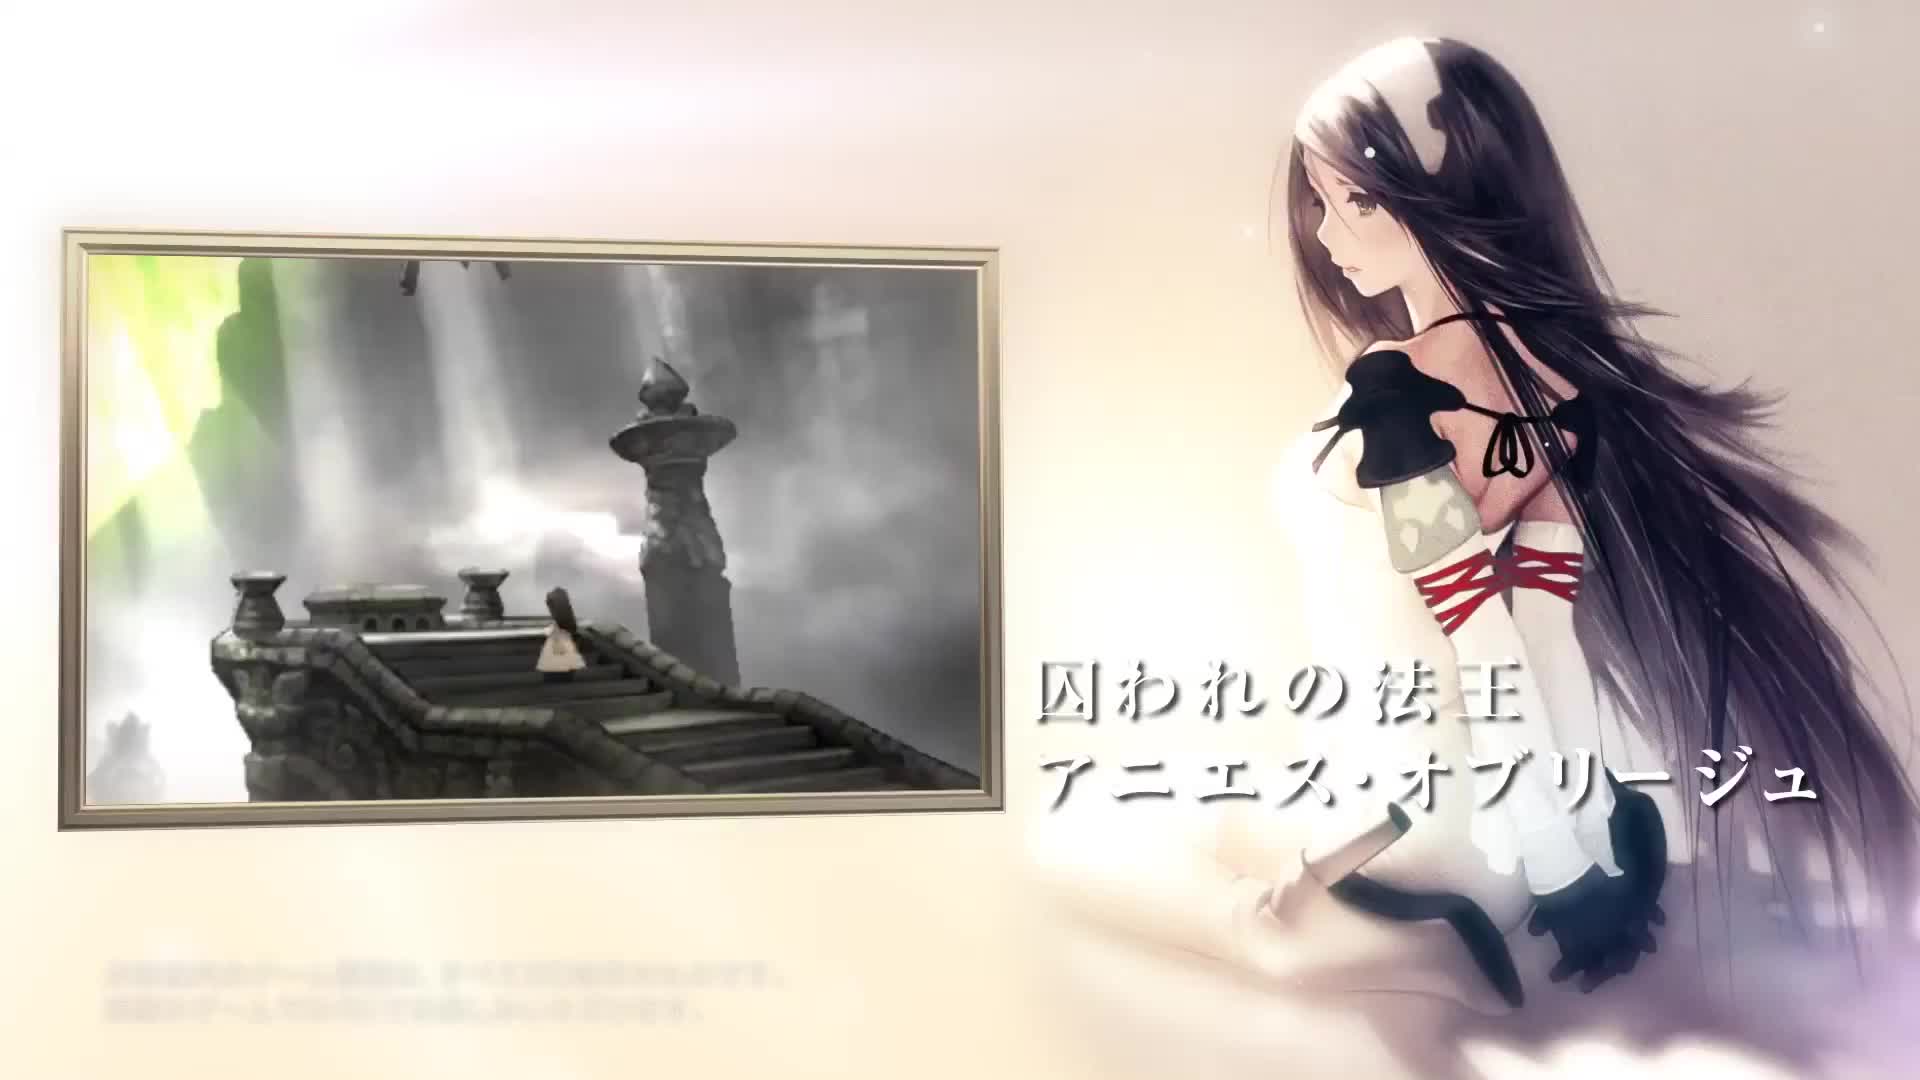 Bravely Second - Three Musketeers Trailer